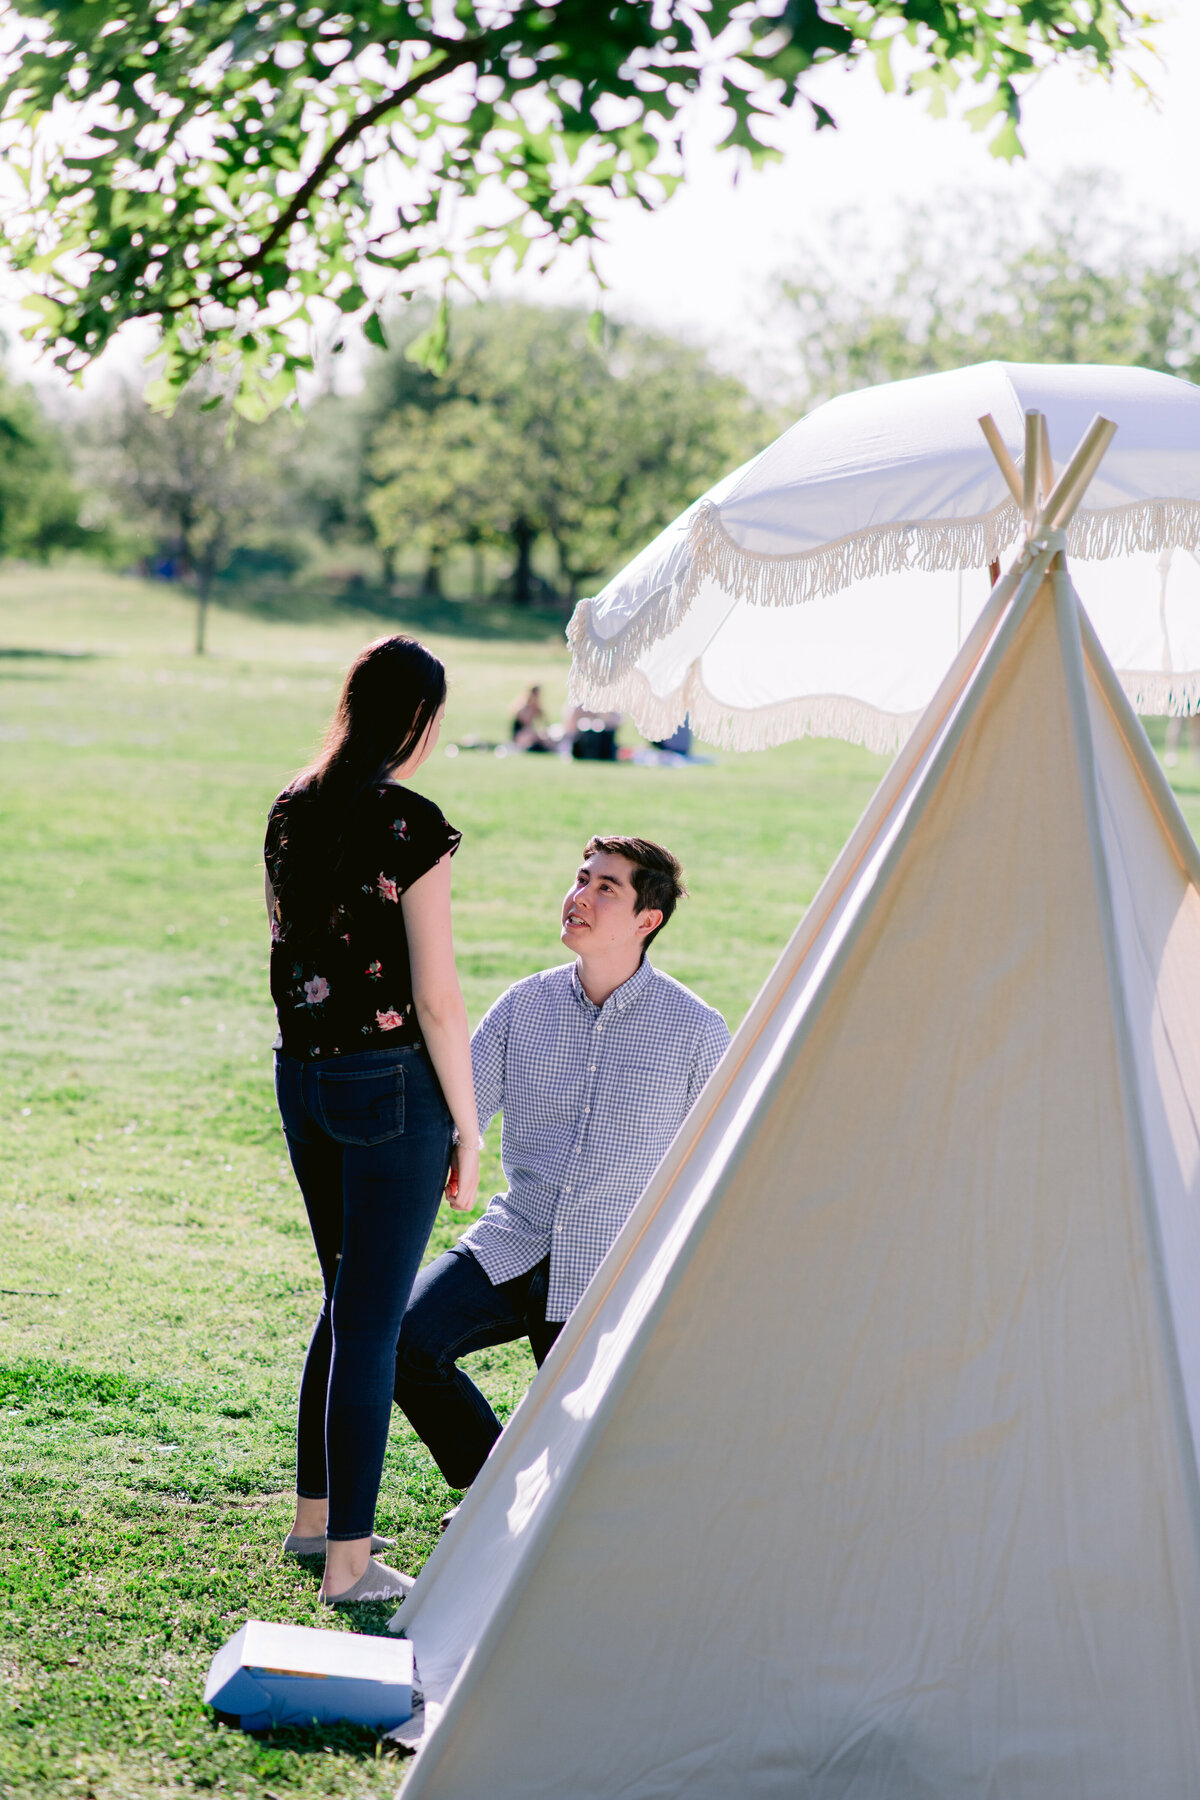 Proposal ideas in Austin man on one knee outside of tent